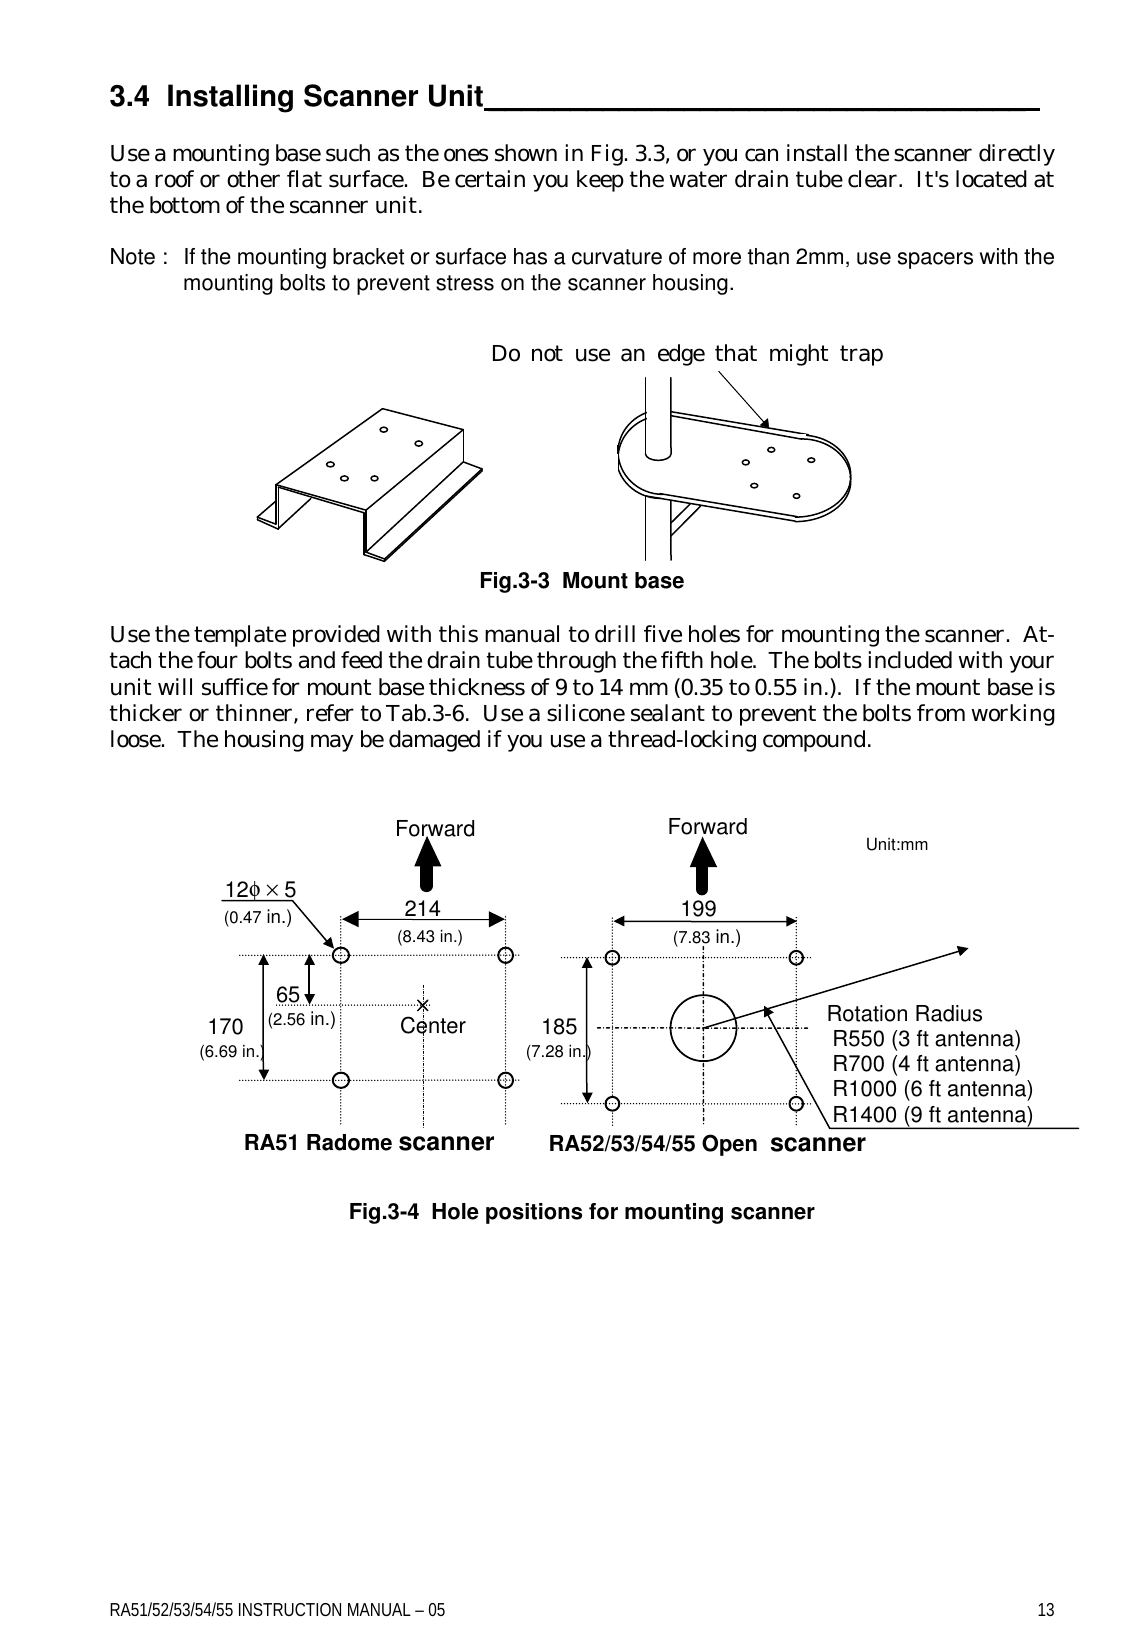 RA51/52/53/54/55 INSTRUCTION MANUAL – 05    13 3.4  Installing Scanner Unit _________________________________   Use a mounting base such as the ones shown in Fig. 3.3, or you can install the scanner directly to a roof or other flat surface.  Be certain you keep the water drain tube clear.  It&apos;s located at the bottom of the scanner unit.  Note : If the mounting bracket or surface has a curvature of more than 2mm, use spacers with the mounting bolts to prevent stress on the scanner housing.           Fig.3-3  Mount base  Use the template provided with this manual to drill five holes for mounting the scanner.  At-tach the four bolts and feed the drain tube through the fifth hole.  The bolts included with your unit will suffice for mount base thickness of 9 to 14 mm (0.35 to 0.55 in.).  If the mount base is thicker or thinner, refer to Tab.3-6.  Use a silicone sealant to prevent the bolts from working loose.  The housing may be damaged if you use a thread-locking compound.                  Fig.3-4  Hole positions for mounting scanner Do not use an edge that might trap water. Center 214 170 12φ × 5 Unit:mm 65 Forward (8.43 in.) (2.56 in.) (0.47 in.) (6.69 in.) 199 (7.83 in.) Forward 185 (7.28 in.) Rotation Radius  R550 (3 ft antenna)  R700 (4 ft antenna)   R1000 (6 ft antenna)  R1400 (9 ft antenna) RA51 Radome scanner RA52/53/54/55 Open  scanner 